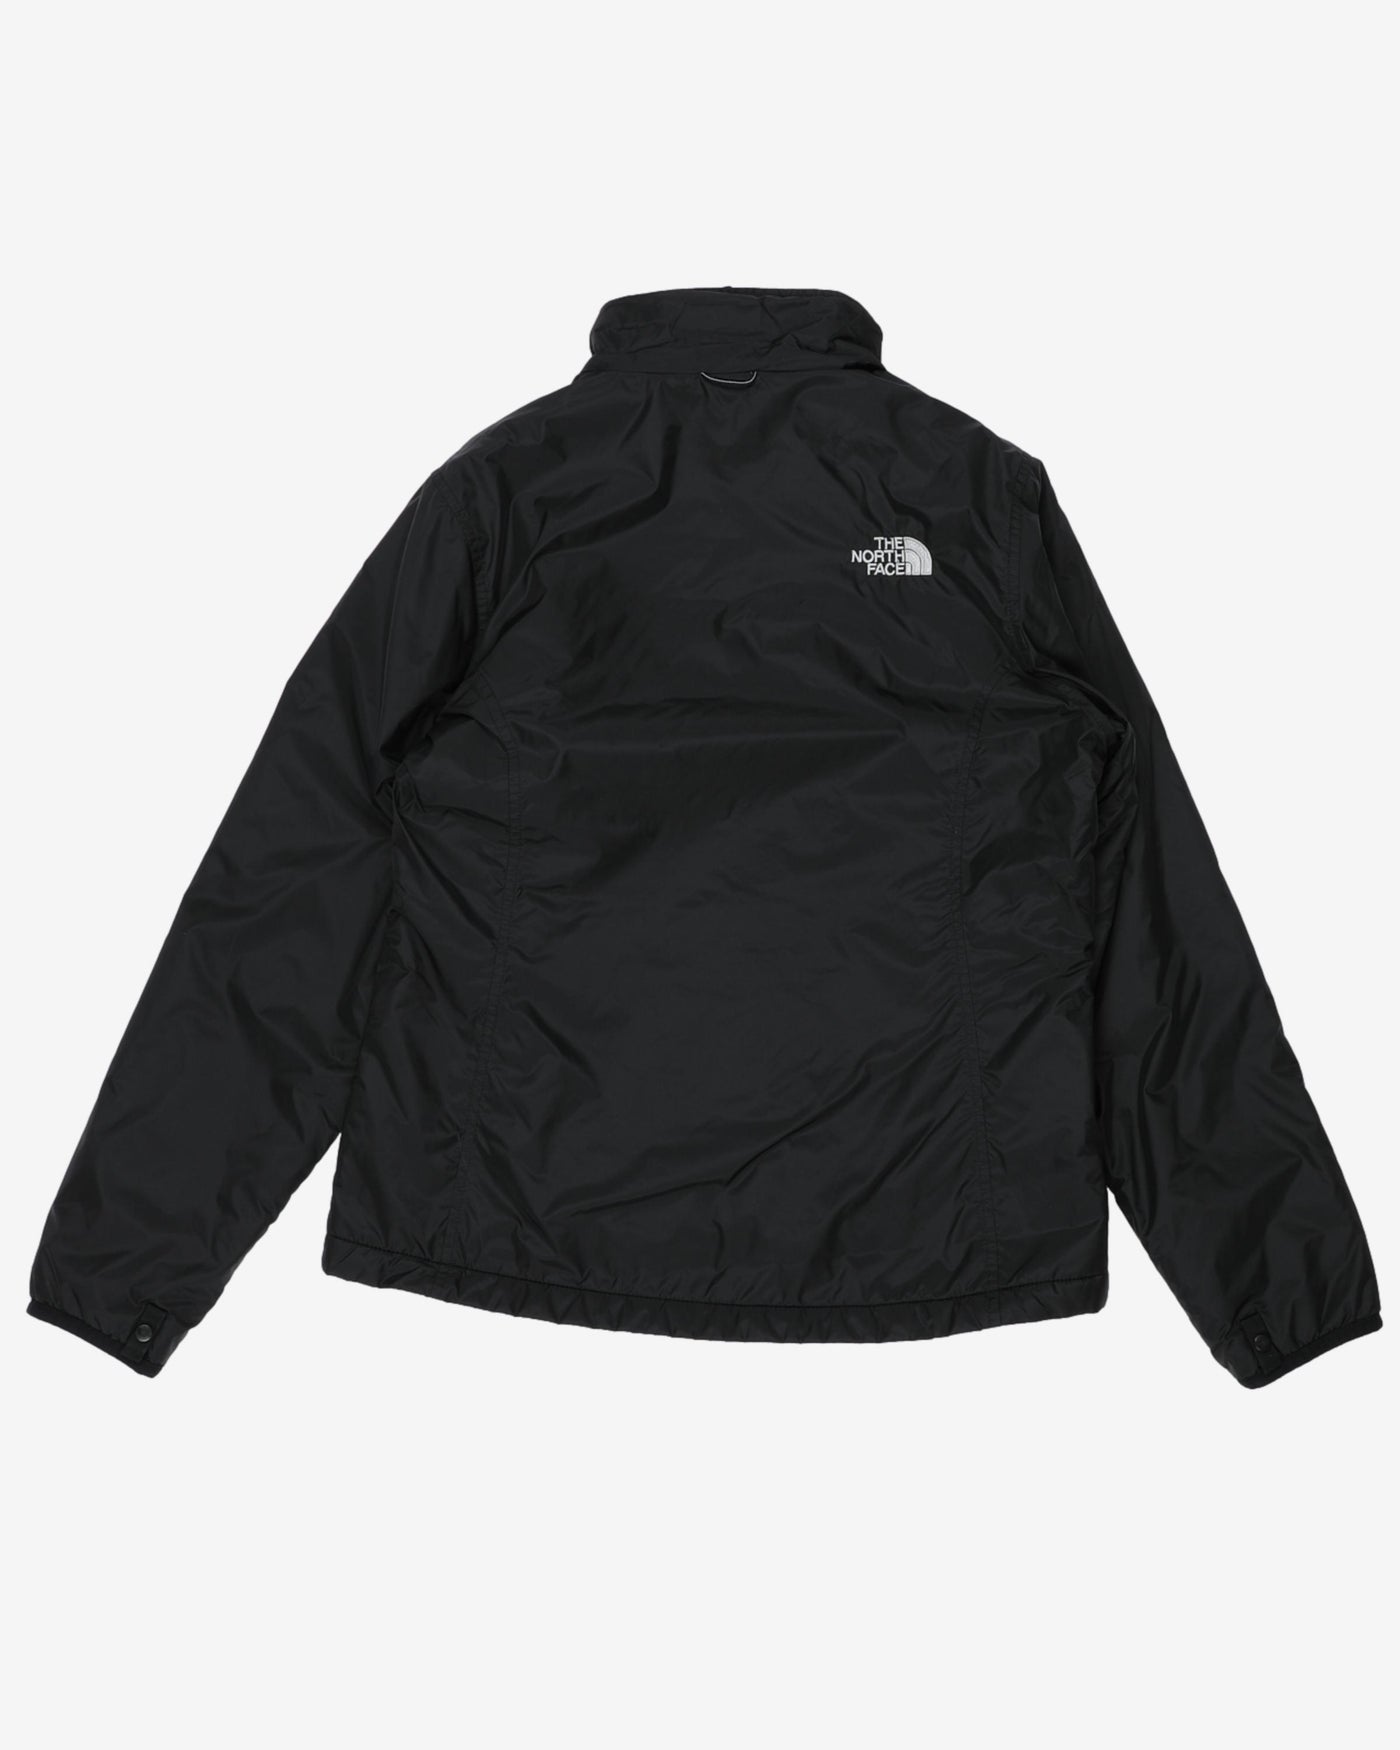 The North Face Black Zip-up Jacket - M